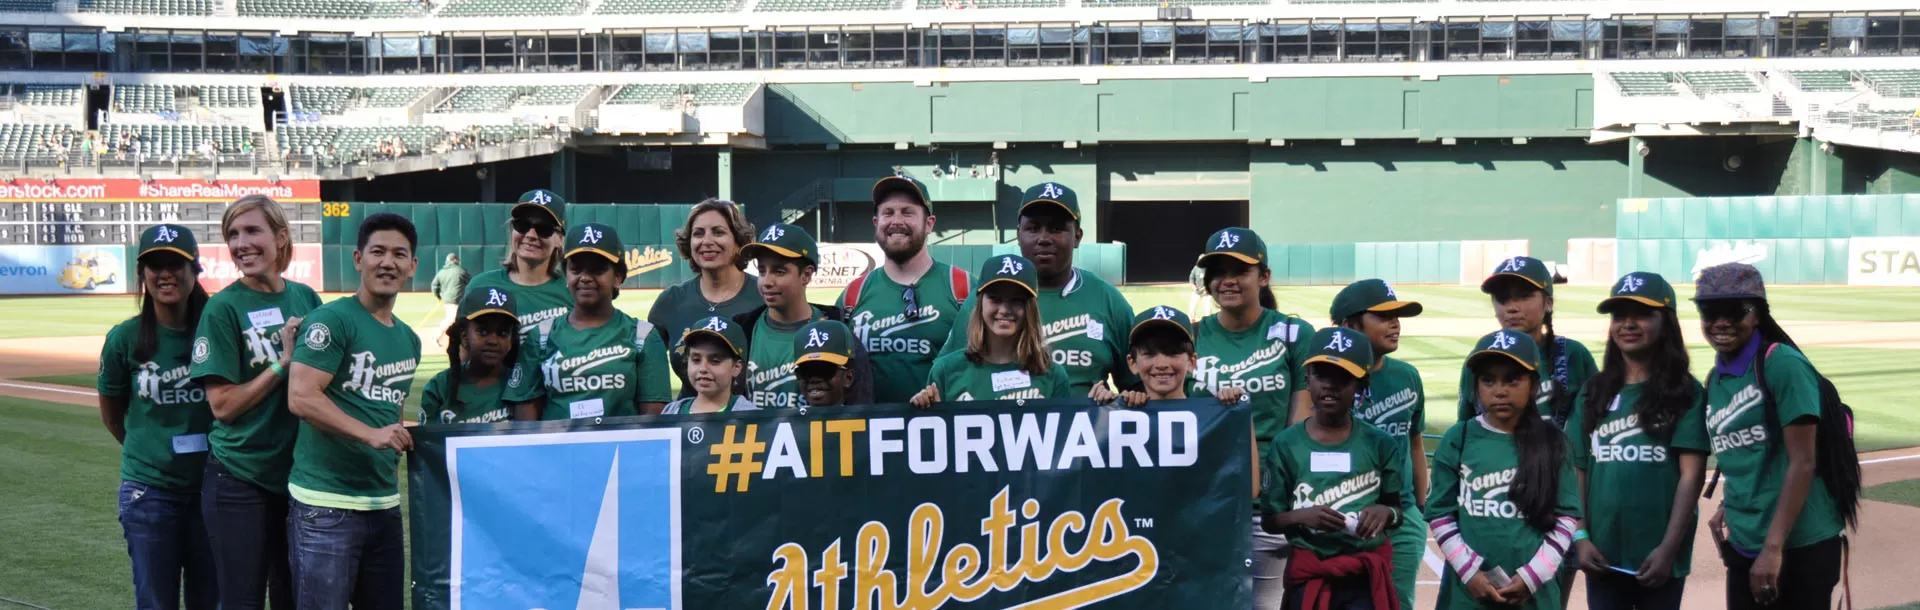 Support HomeRun Heroes and the A’s!